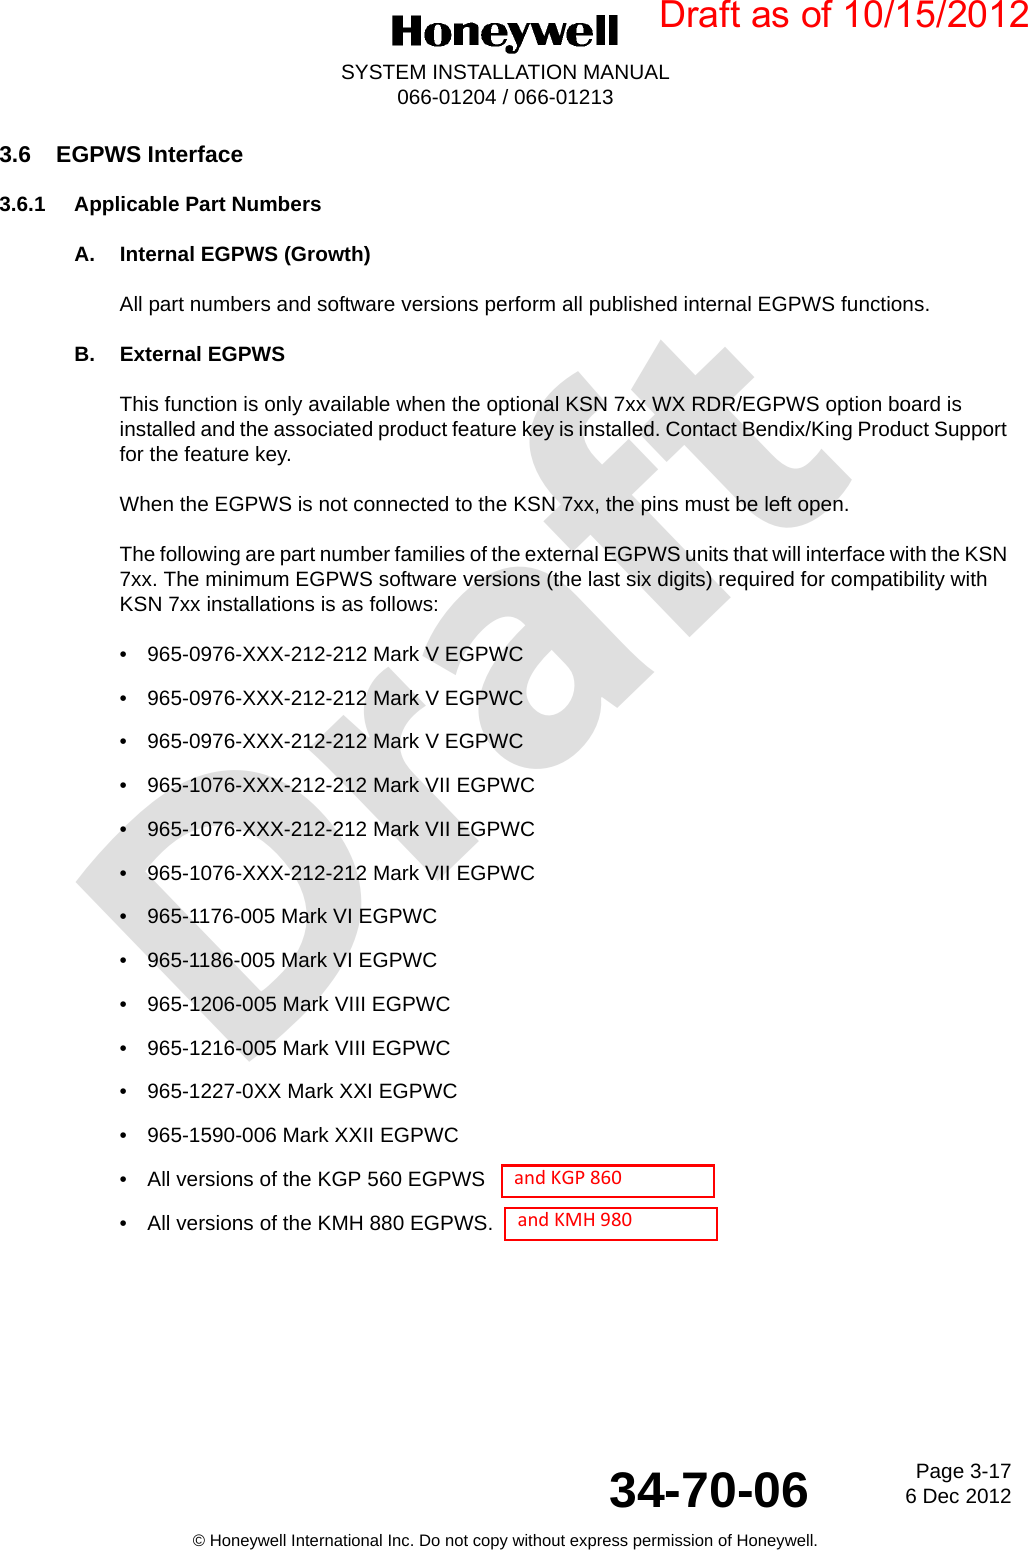 DraftPage 3-176 Dec 201234-70-06SYSTEM INSTALLATION MANUAL066-01204 / 066-01213© Honeywell International Inc. Do not copy without express permission of Honeywell.3.6 EGPWS Interface3.6.1 Applicable Part NumbersA. Internal EGPWS (Growth)All part numbers and software versions perform all published internal EGPWS functions.B. External EGPWSThis function is only available when the optional KSN 7xx WX RDR/EGPWS option board is installed and the associated product feature key is installed. Contact Bendix/King Product Support for the feature key.When the EGPWS is not connected to the KSN 7xx, the pins must be left open.The following are part number families of the external EGPWS units that will interface with the KSN 7xx. The minimum EGPWS software versions (the last six digits) required for compatibility with KSN 7xx installations is as follows:•  965-0976-XXX-212-212 Mark V EGPWC•  965-0976-XXX-212-212 Mark V EGPWC•  965-0976-XXX-212-212 Mark V EGPWC•  965-1076-XXX-212-212 Mark VII EGPWC•  965-1076-XXX-212-212 Mark VII EGPWC•  965-1076-XXX-212-212 Mark VII EGPWC•  965-1176-005 Mark VI EGPWC•  965-1186-005 Mark VI EGPWC•  965-1206-005 Mark VIII EGPWC•  965-1216-005 Mark VIII EGPWC•  965-1227-0XX Mark XXI EGPWC•  965-1590-006 Mark XXII EGPWC•  All versions of the KGP 560 EGPWS•  All versions of the KMH 880 EGPWS.Draft as of 10/15/2012  and KGP 860  and KMH 980